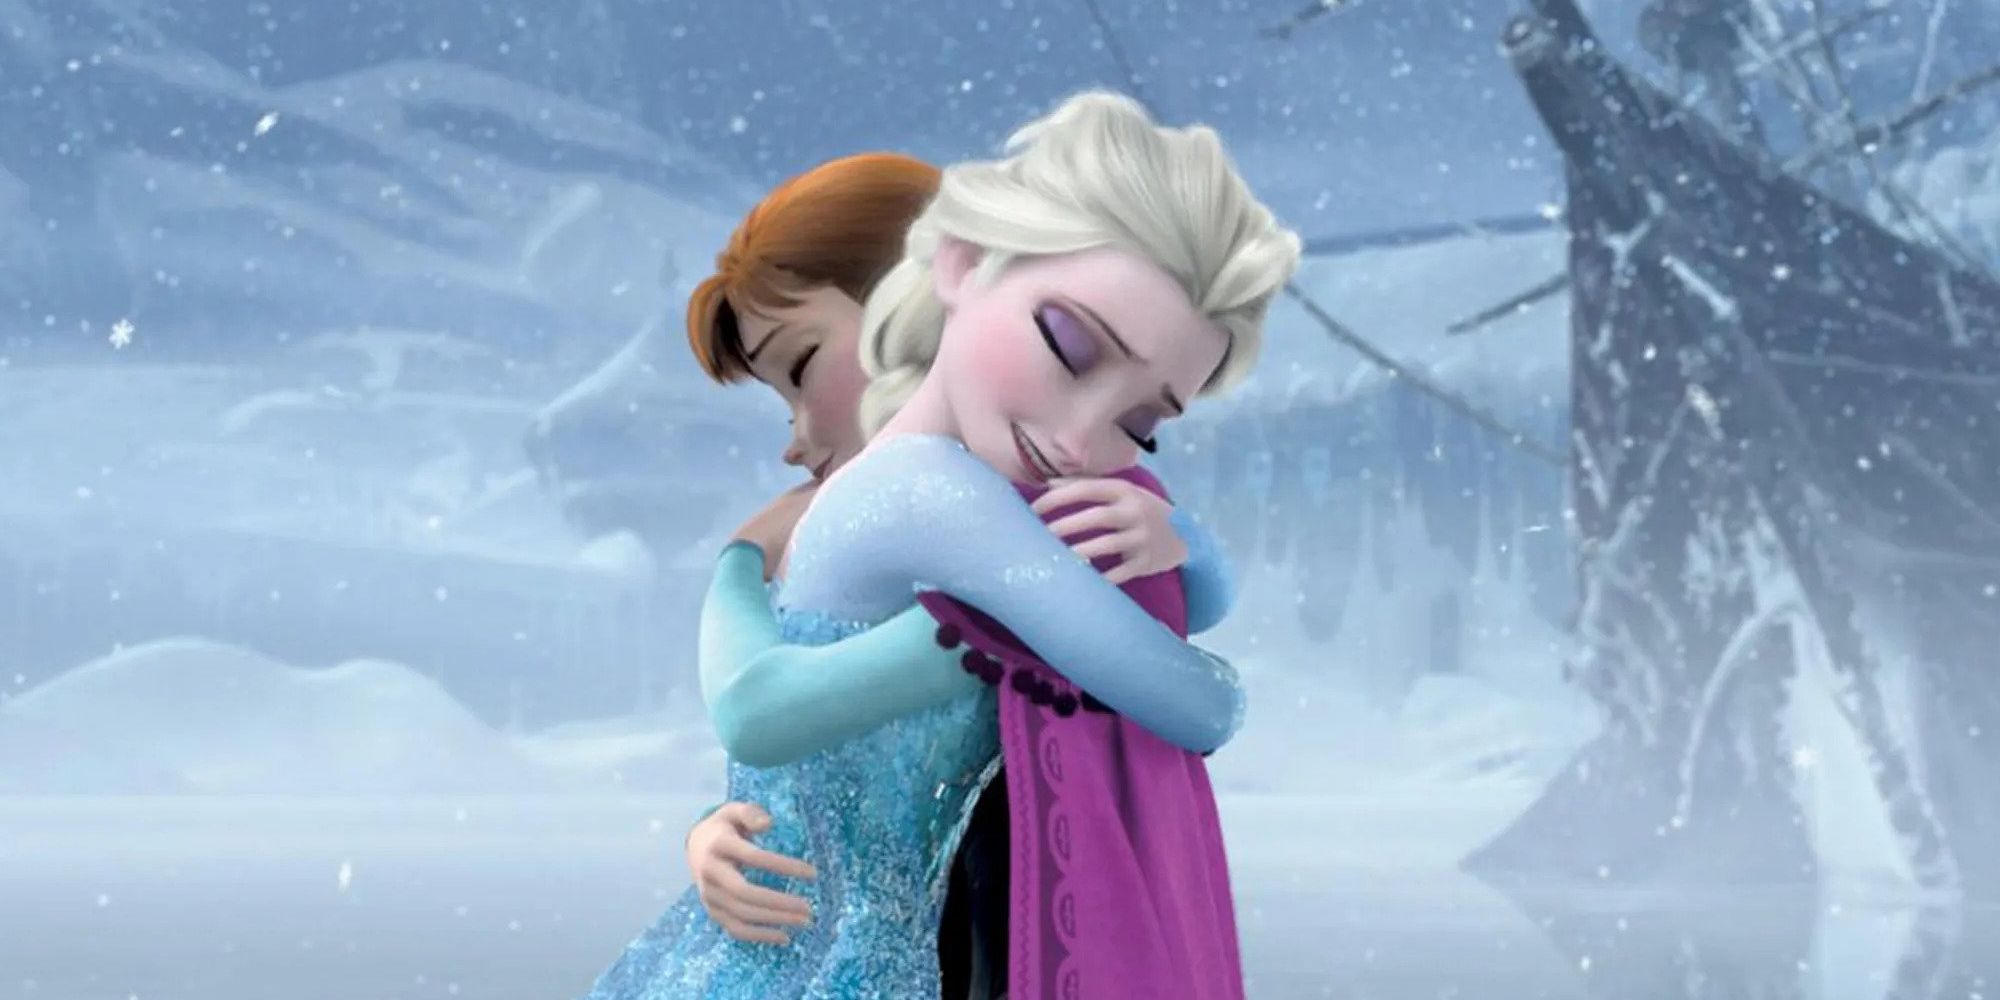 Ana and Elsa embracing in Frozen